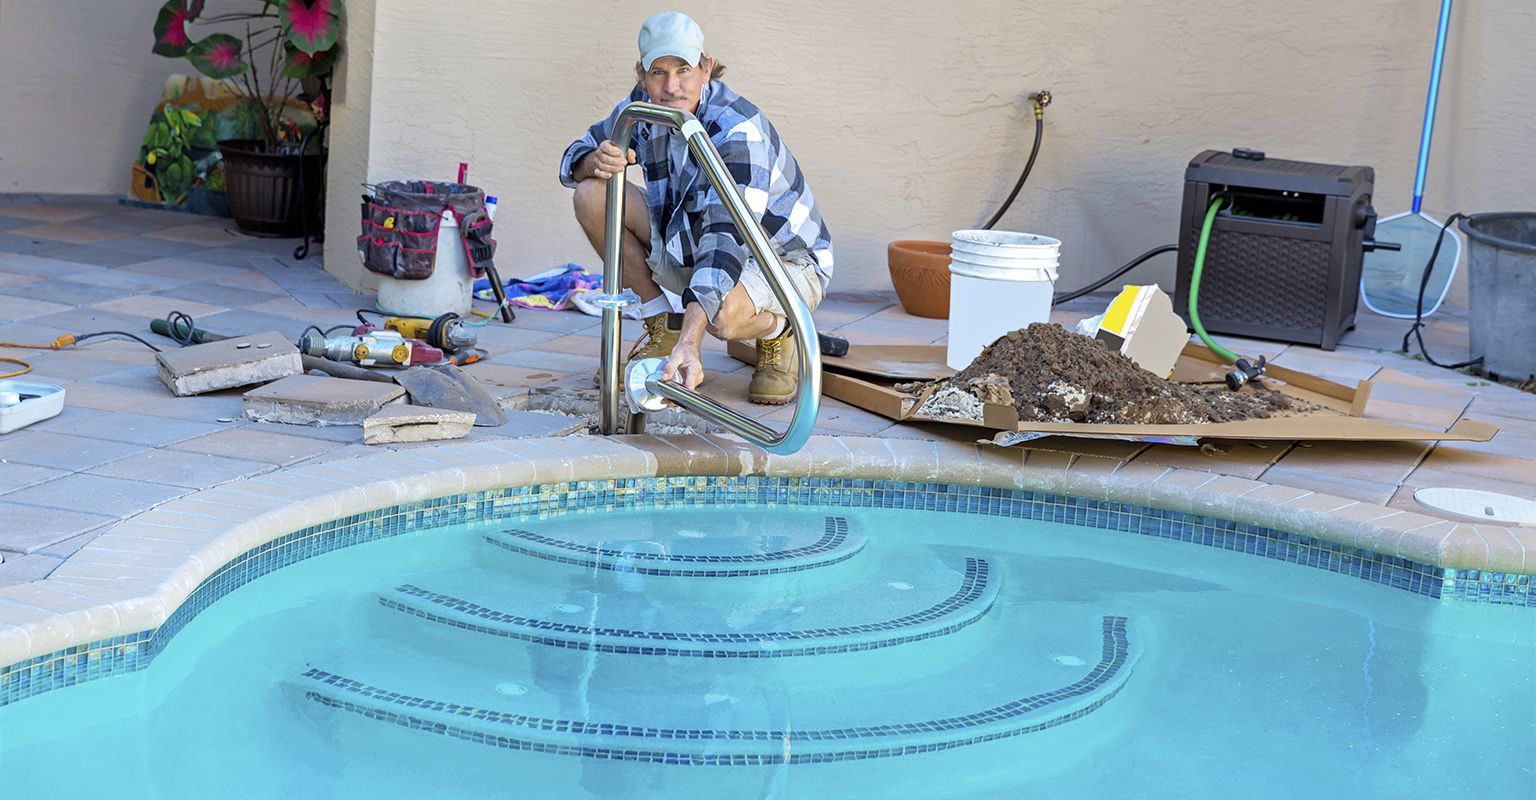 The 10 Best Swimming Pool Repair Services in Houston, TX 2022